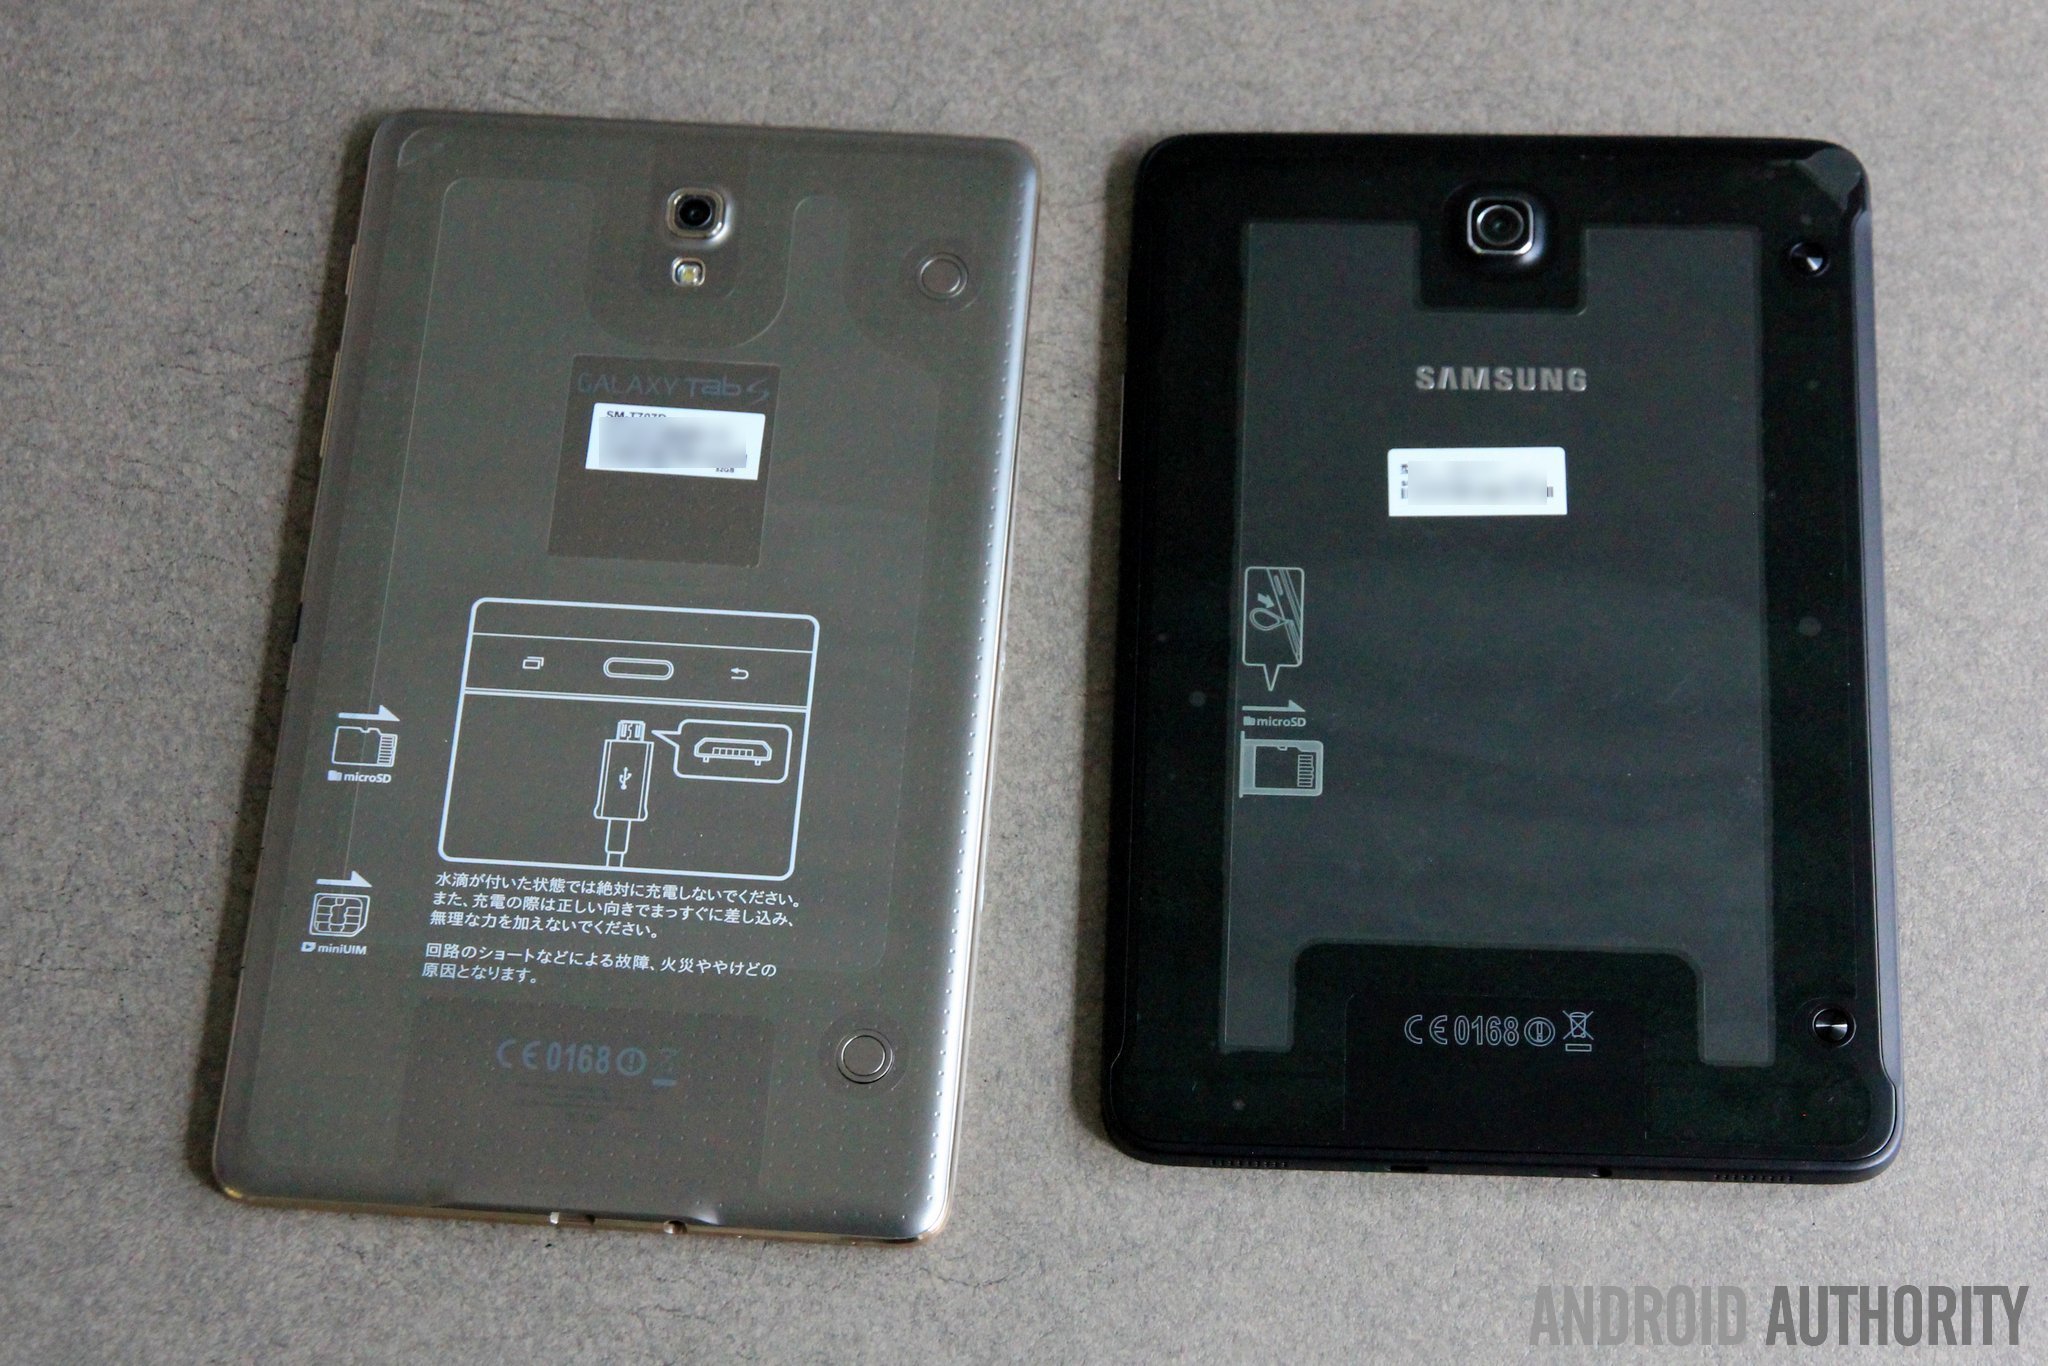 Notice the Tab S 8.4 (2014) has a camera flash yet the Tab S2 8.0 (2015) lacks it.